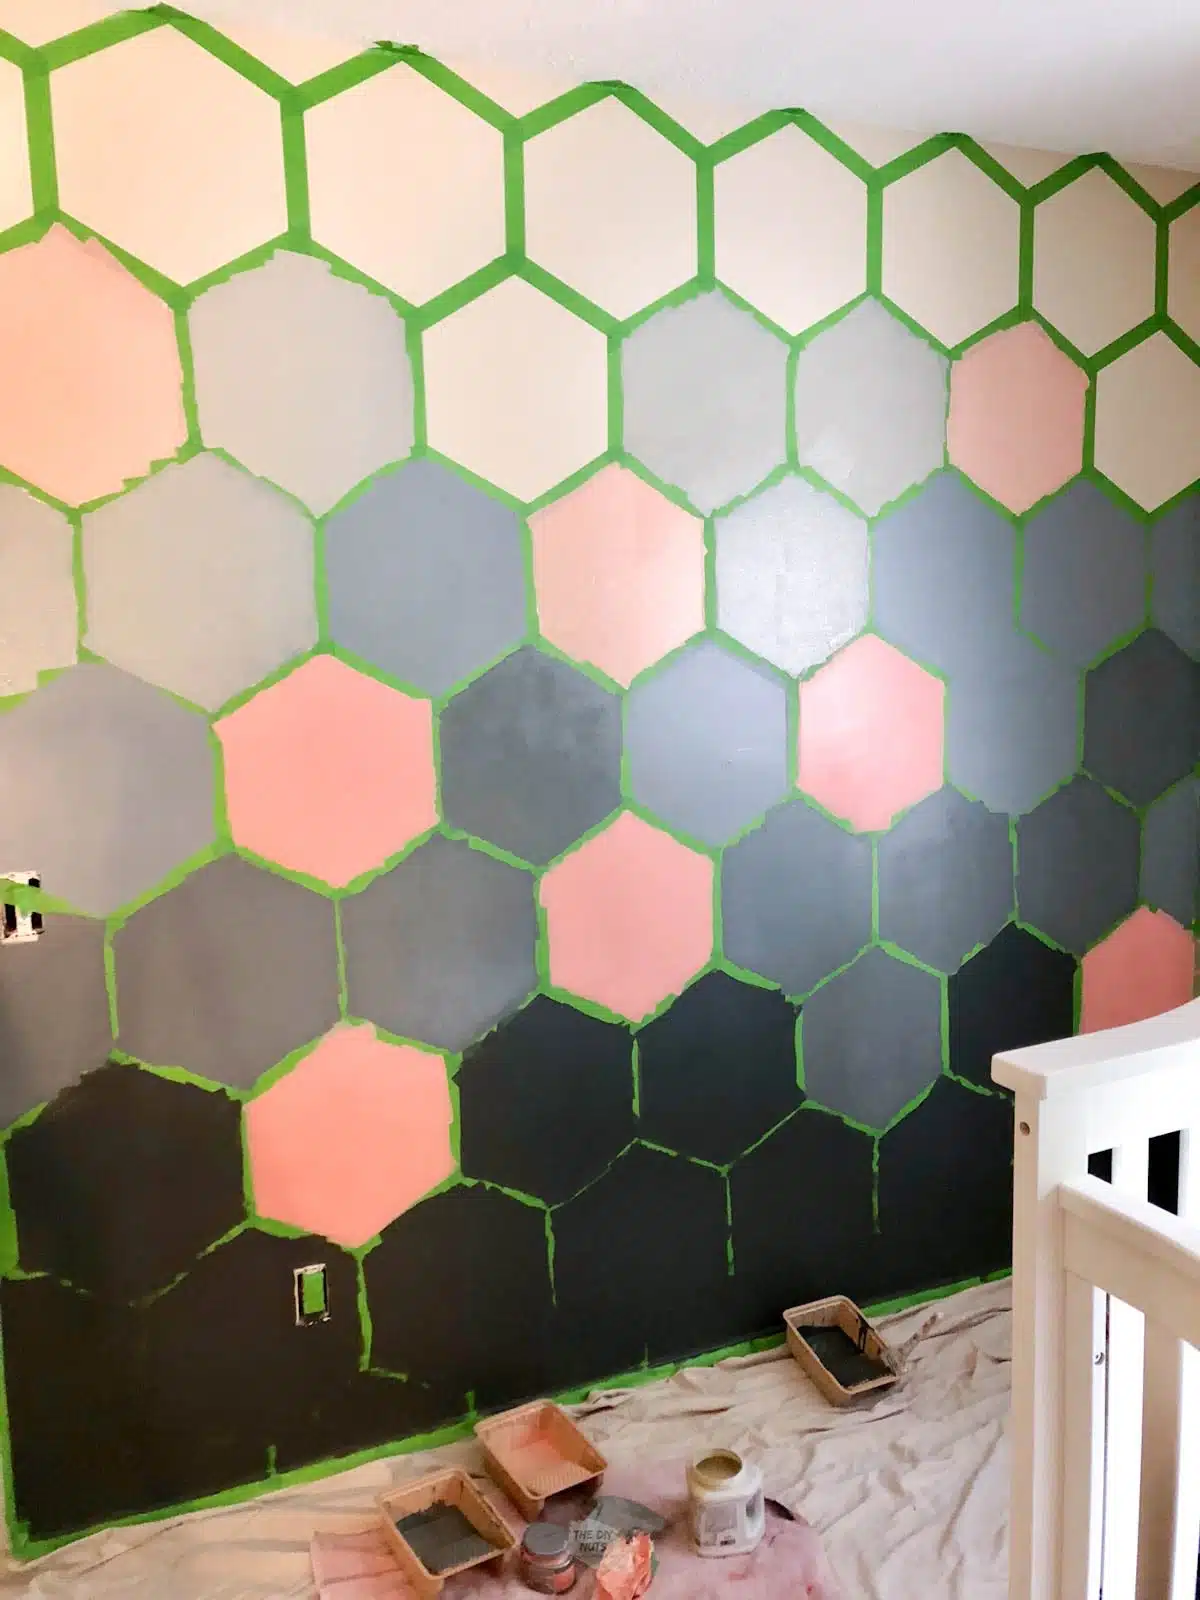 hexagon design on wall being partially painted.